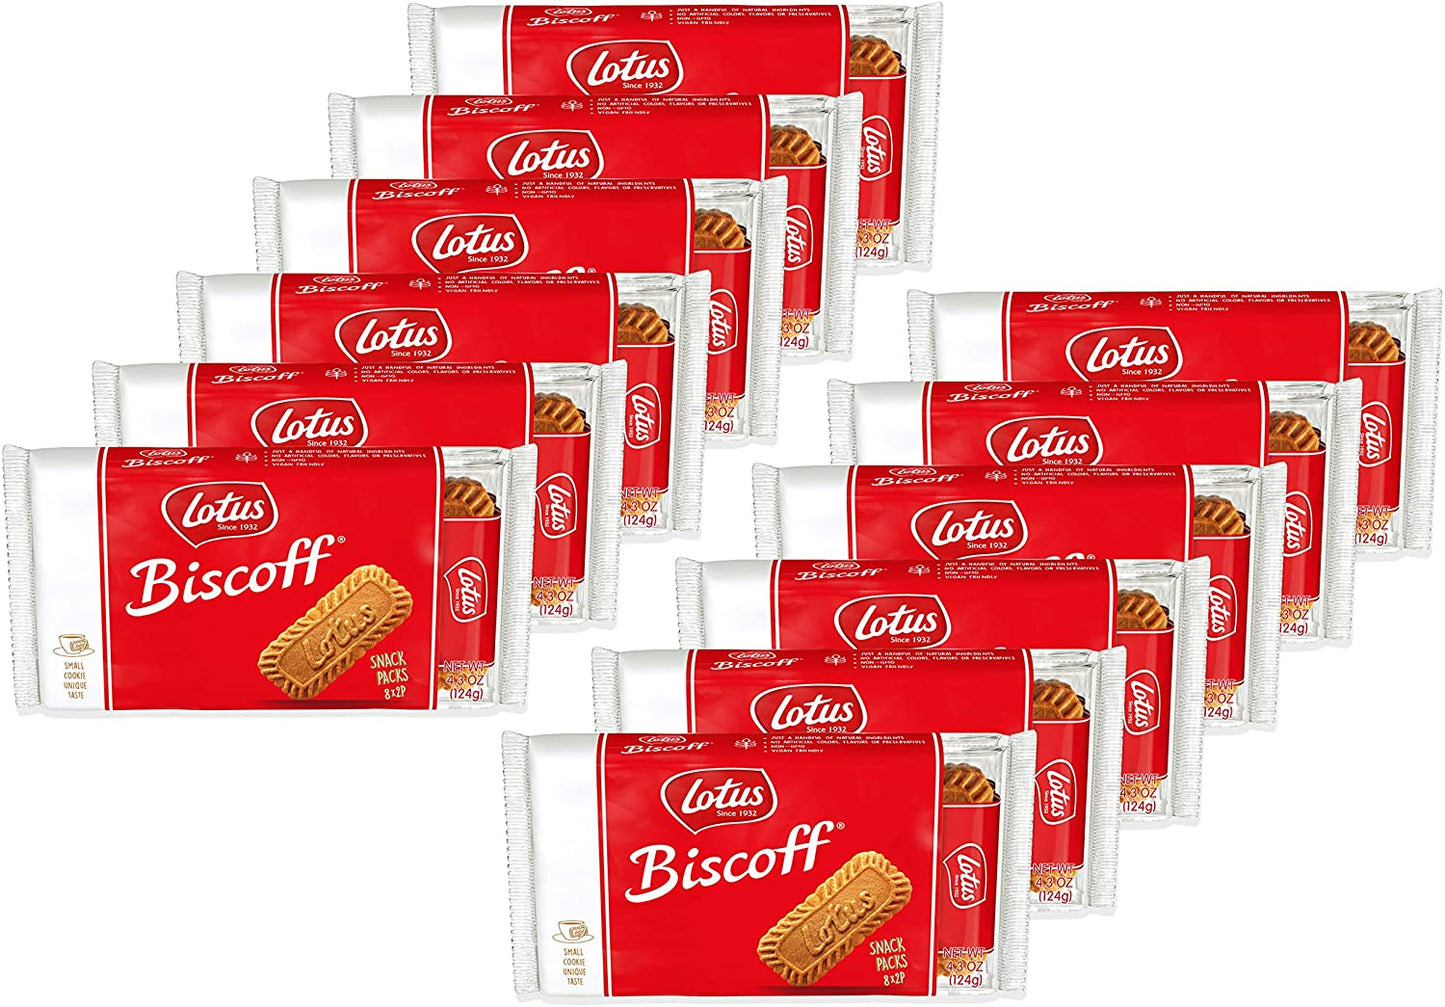 Lotus Biscoff - 192 European Biscuit Cookies - 4.3 Ounce (Pack Of 12) - 8 Two-Packs Per Retail Pack Individually Wrapped - Non Gmo Project Verified + Vegan